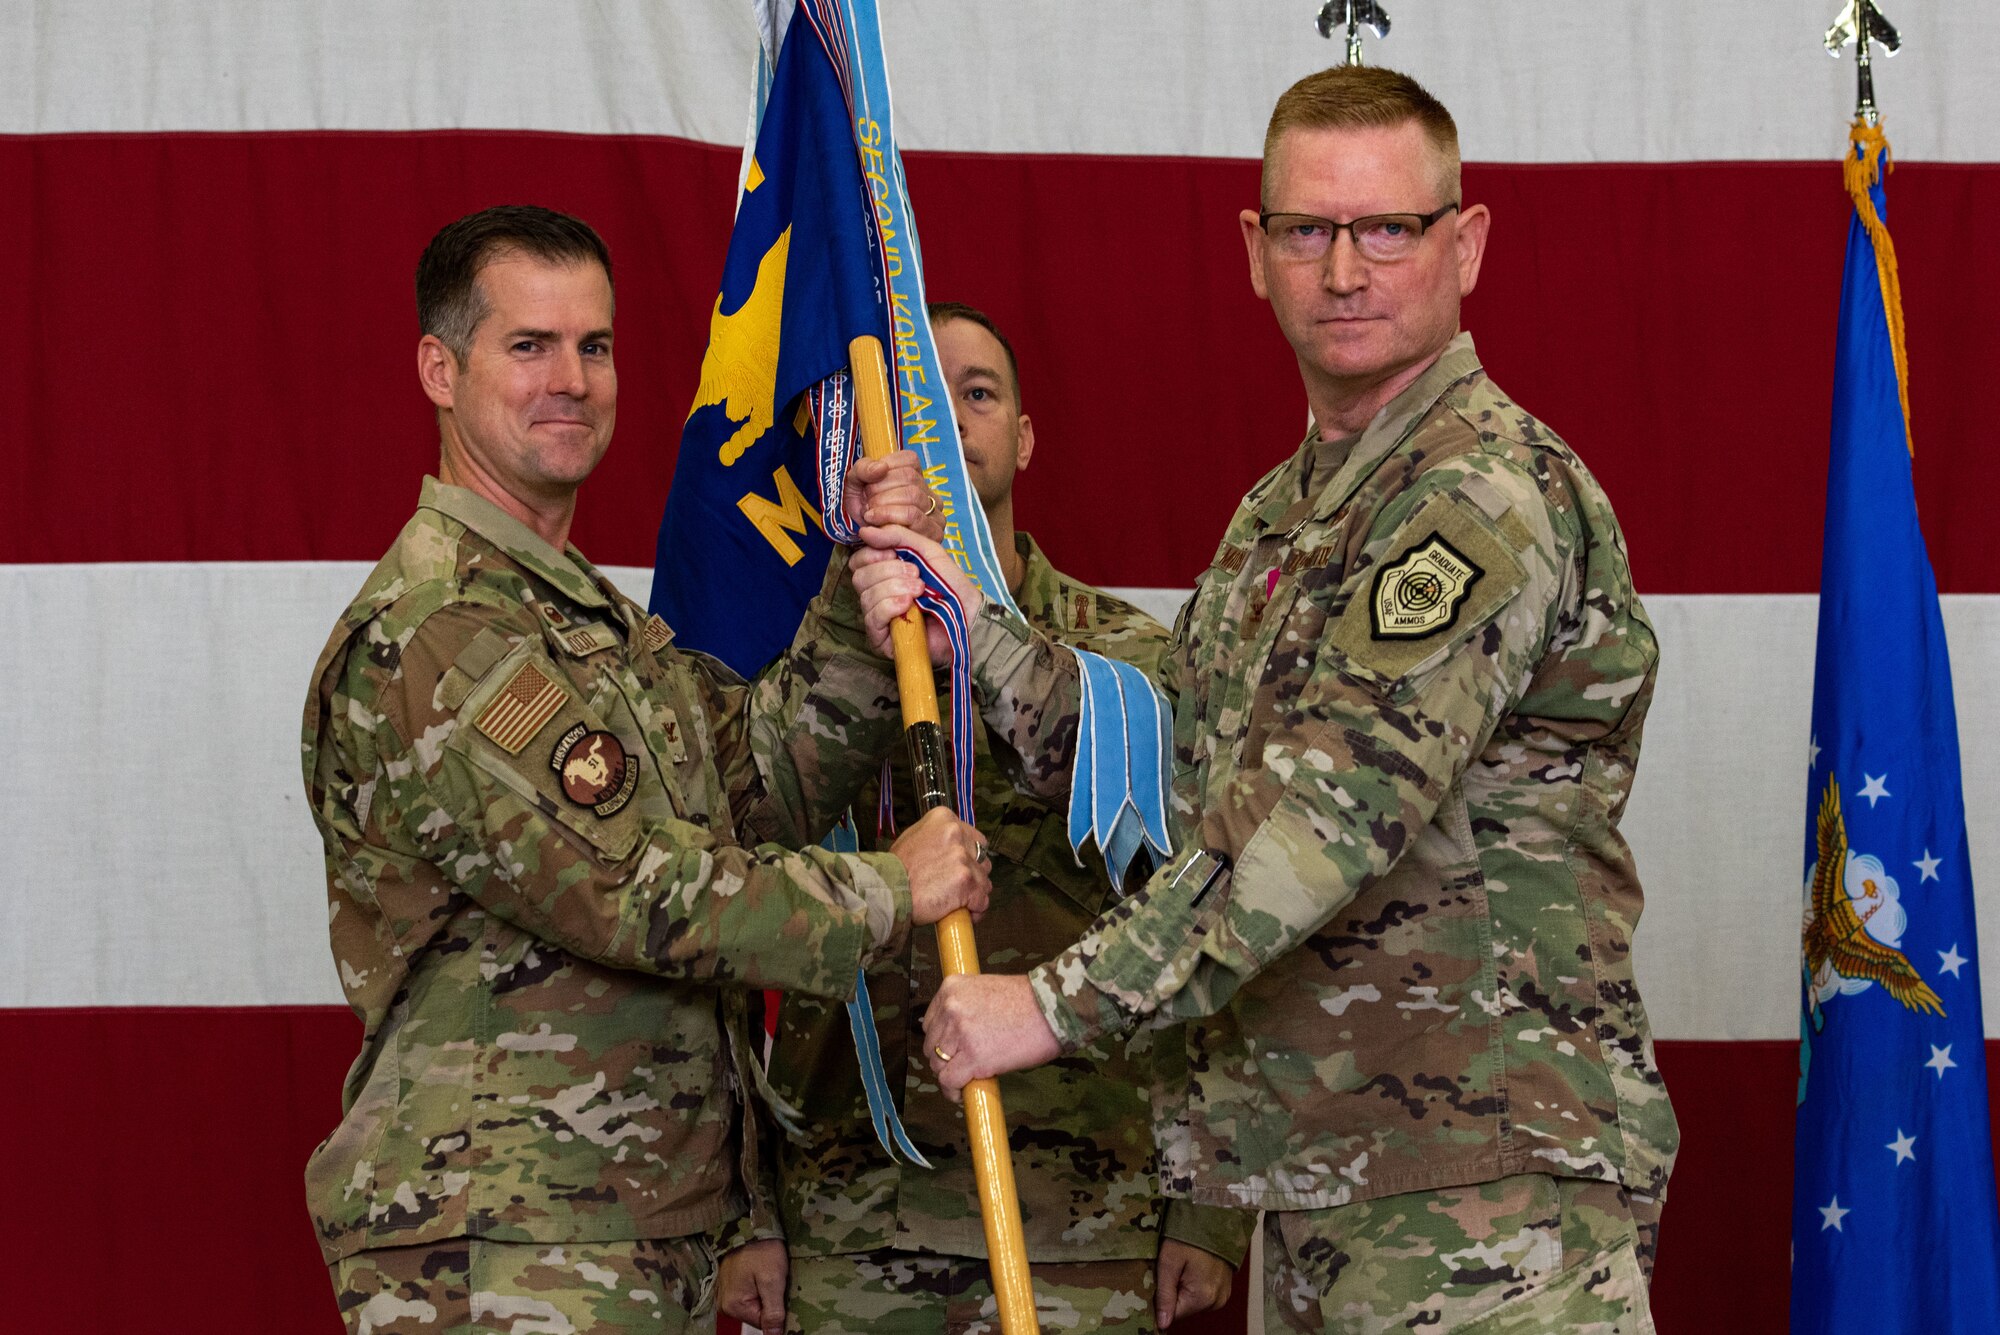 Col. Joshua Wood, 51st Fighter Wing commander, left, receives the guidon from Col. Brian Moore, 51st Maintenance Group outgoing commander, as a symbol of his relinquishment of command of the MXG at Osan Air Base, Republic of Korea, June 15, 2022.